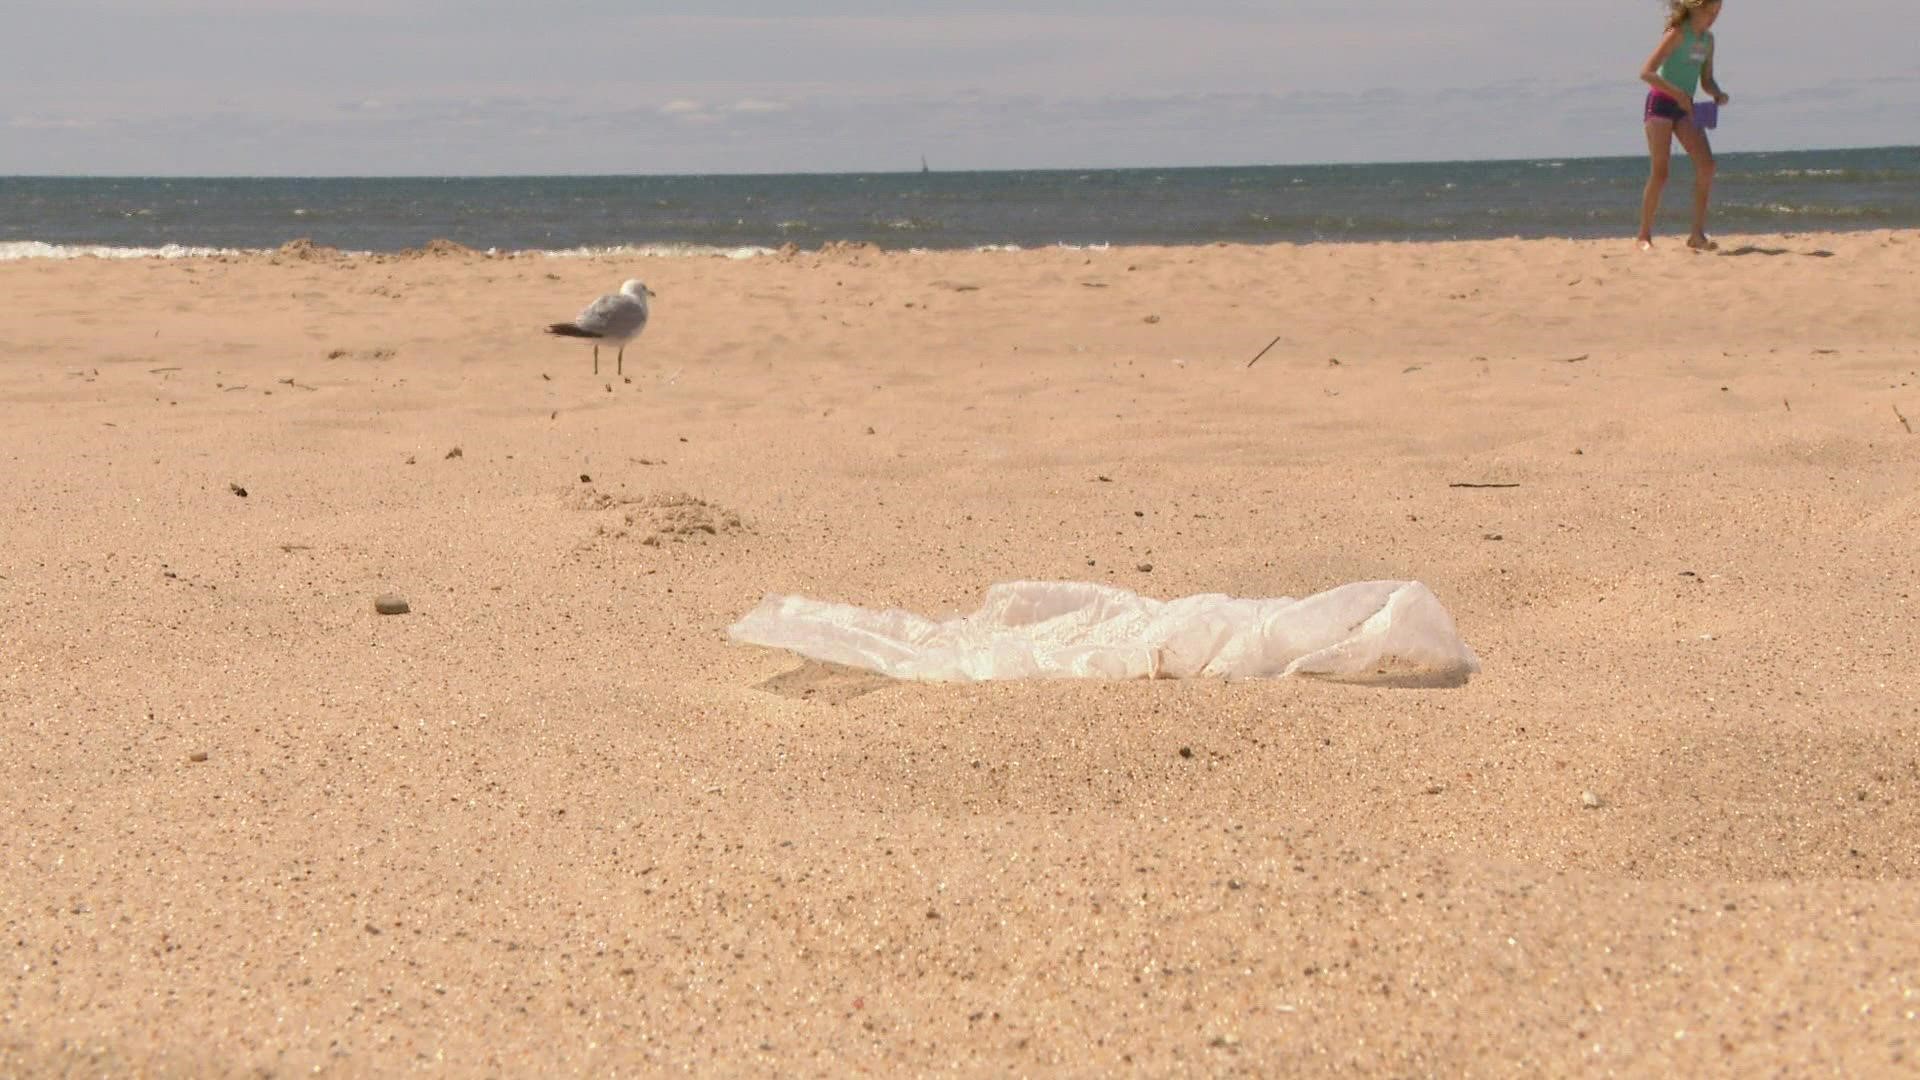 It's not unusual for debris and other items to wash up on the shore after a big storm or big waves.